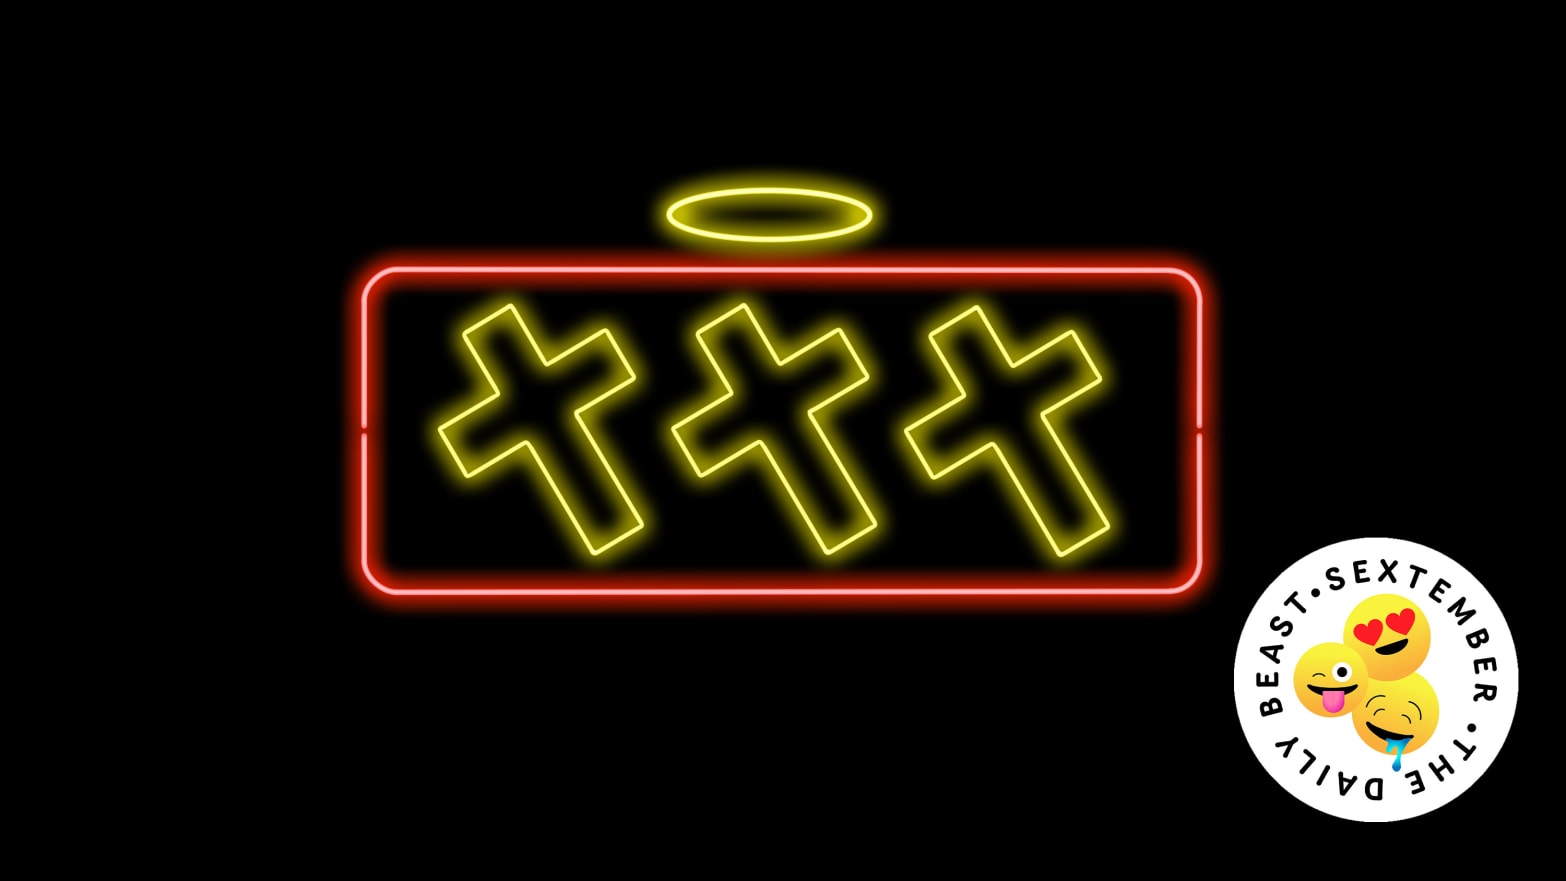 Illustration of a neon sign with "XXX" made out of crosses with a halo above it